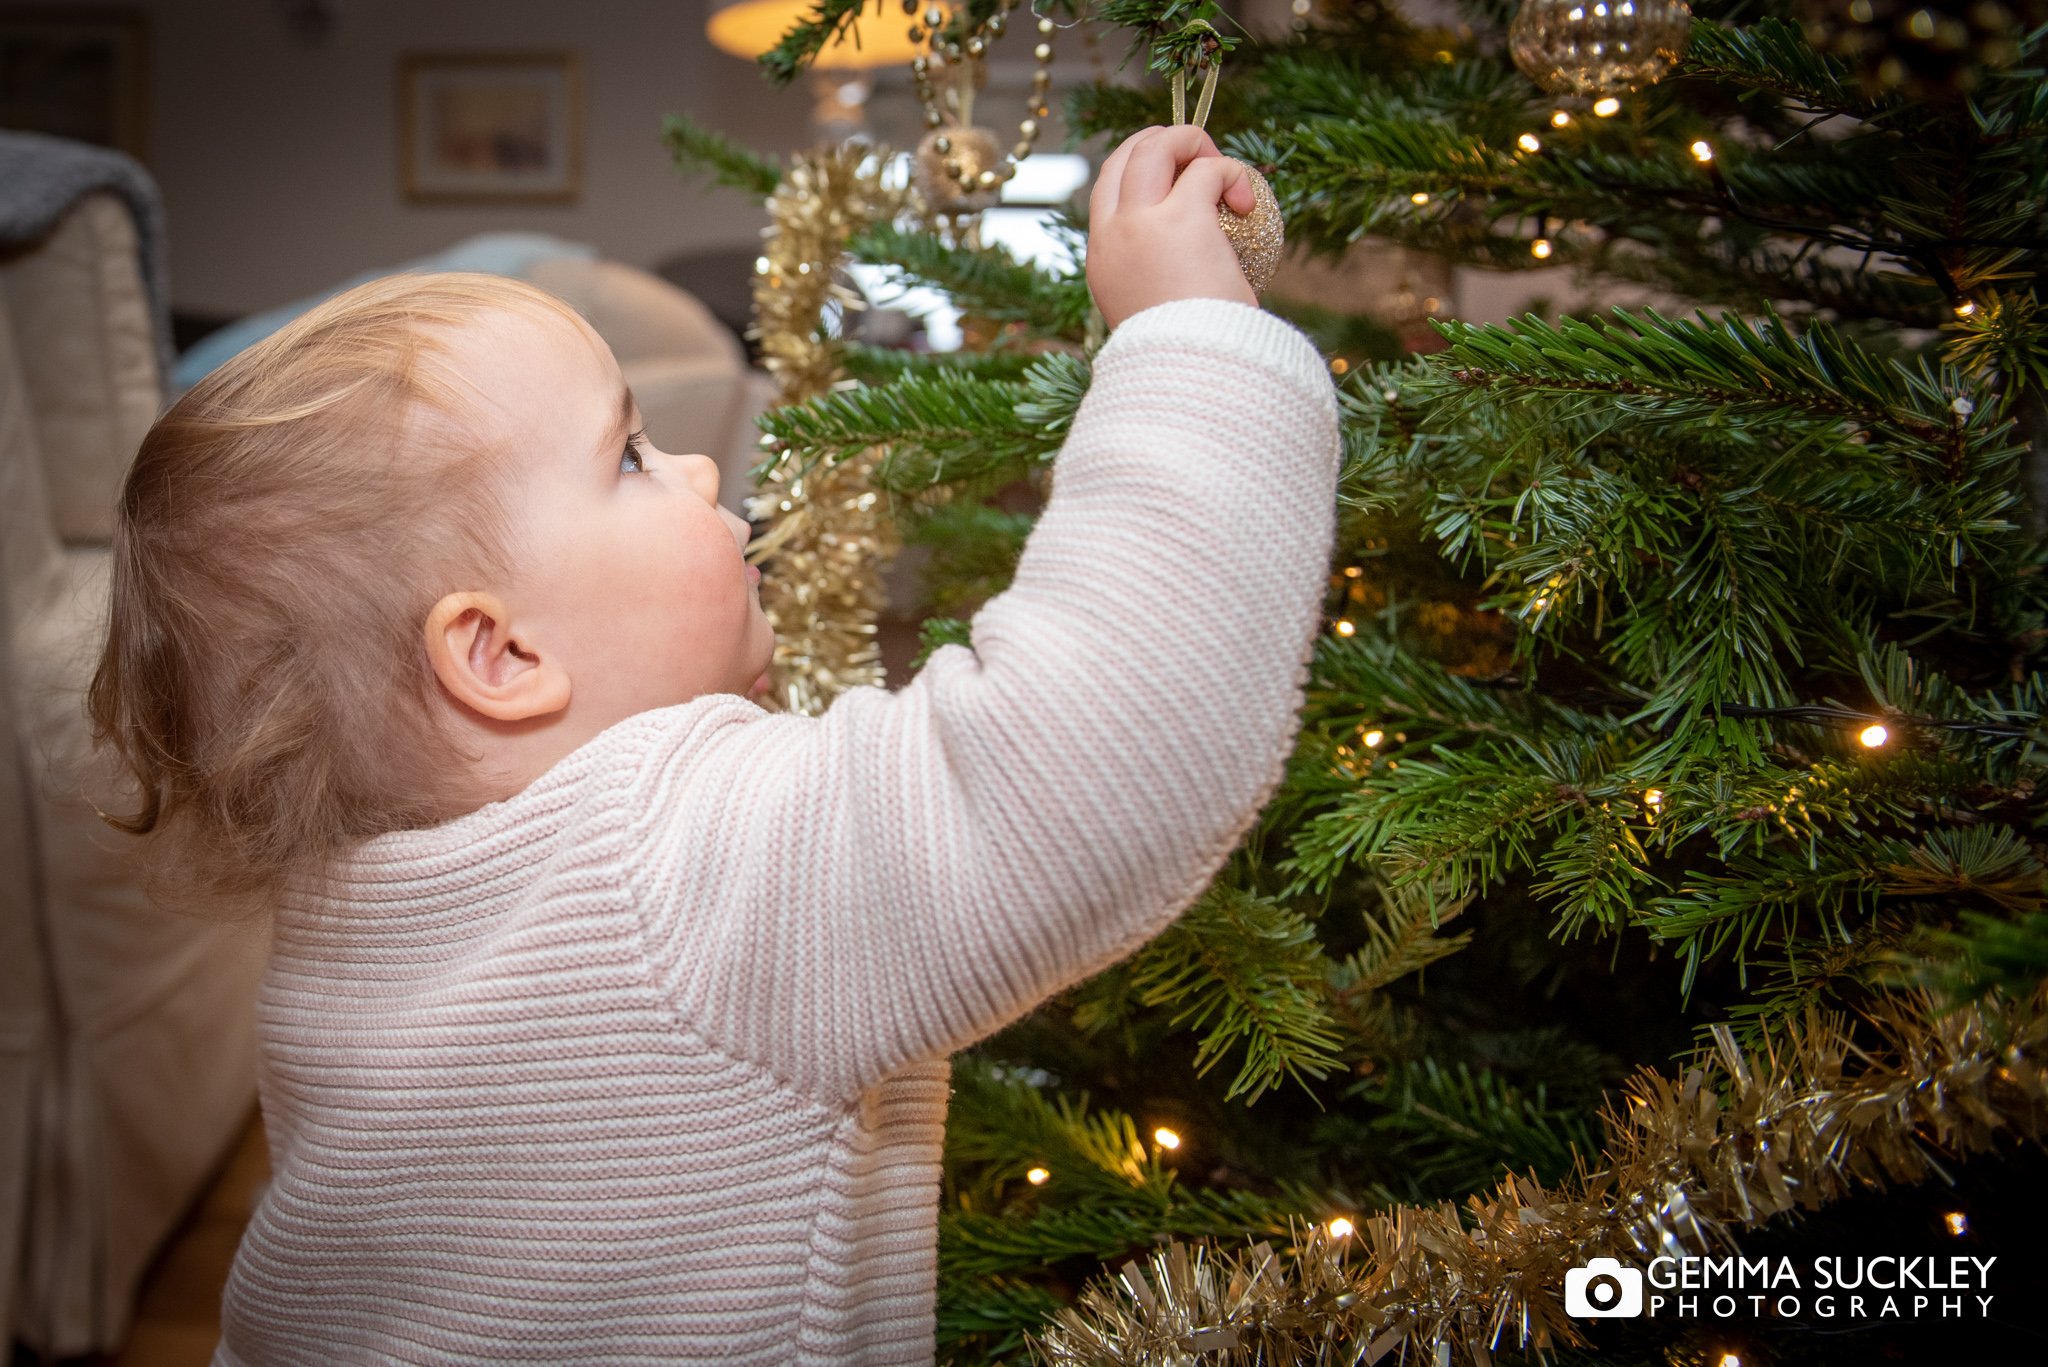 a little girl putting a bauble on a Christmas tree